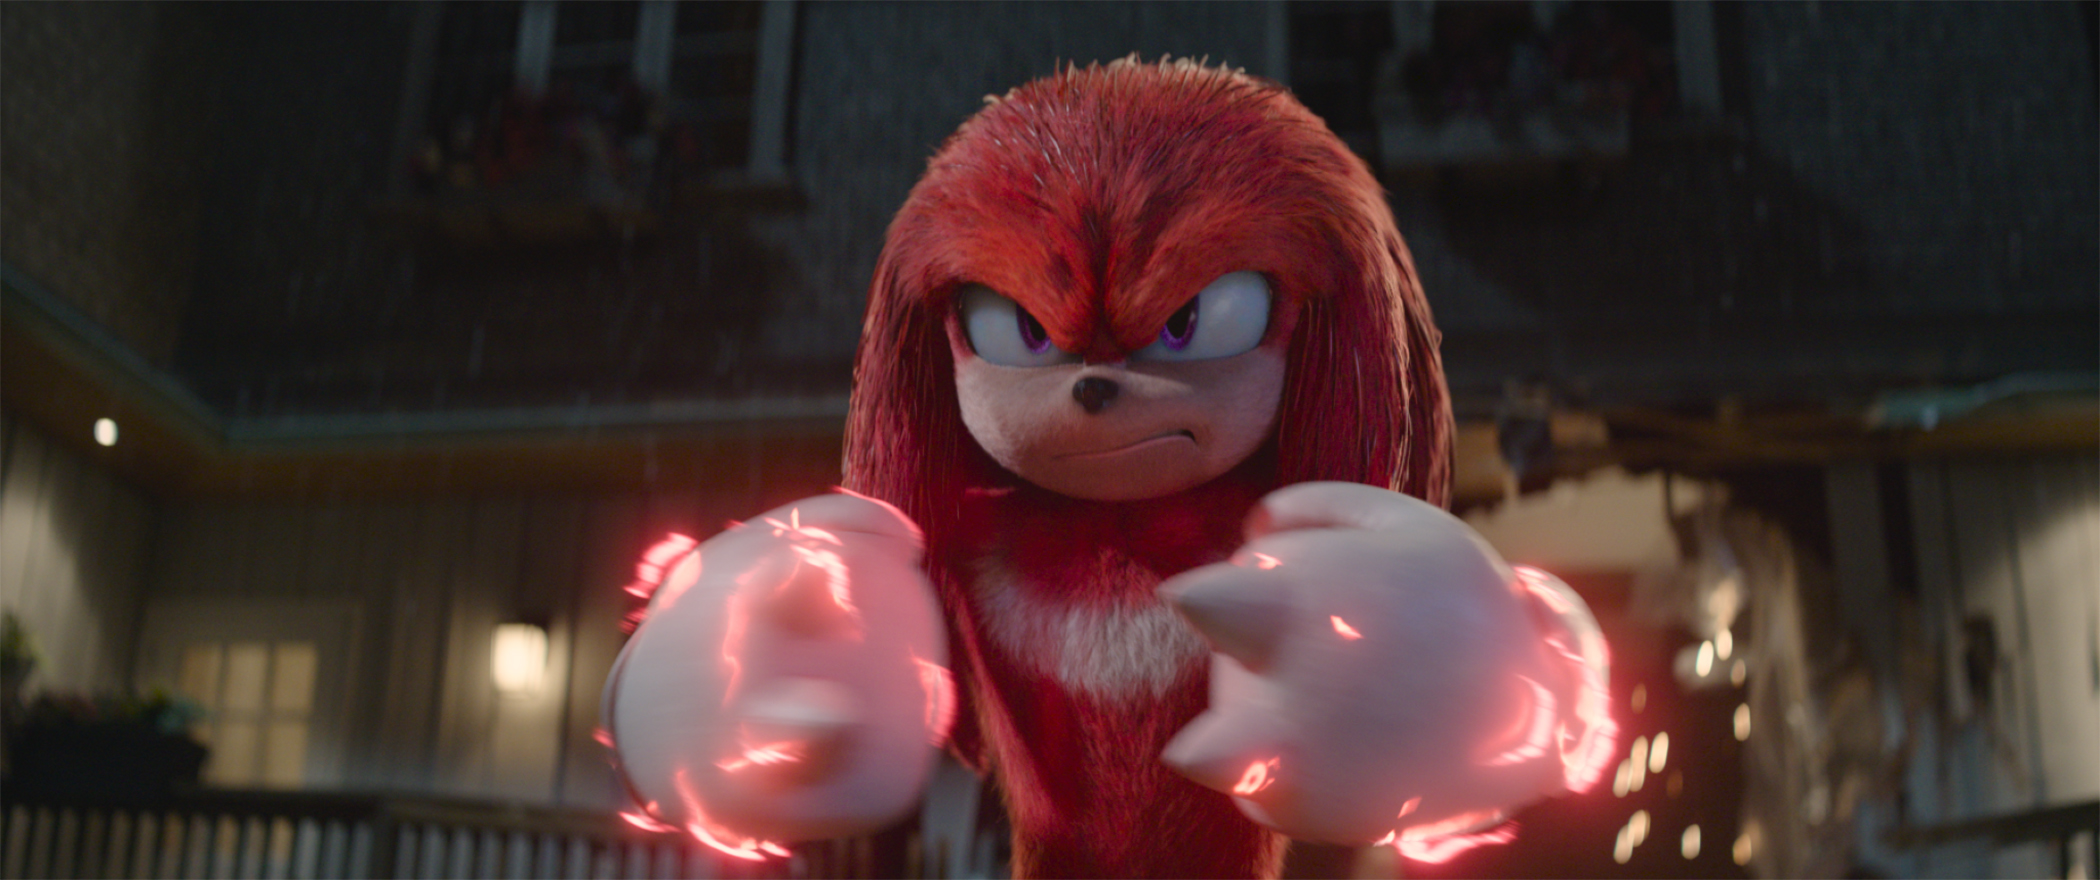 Knuckles (Idris Elba) in Sonic The Hedgehog 2 from Paramount Pictures and Sega. Photo Credit: Courtesy Paramount Pictures and Sega of America.